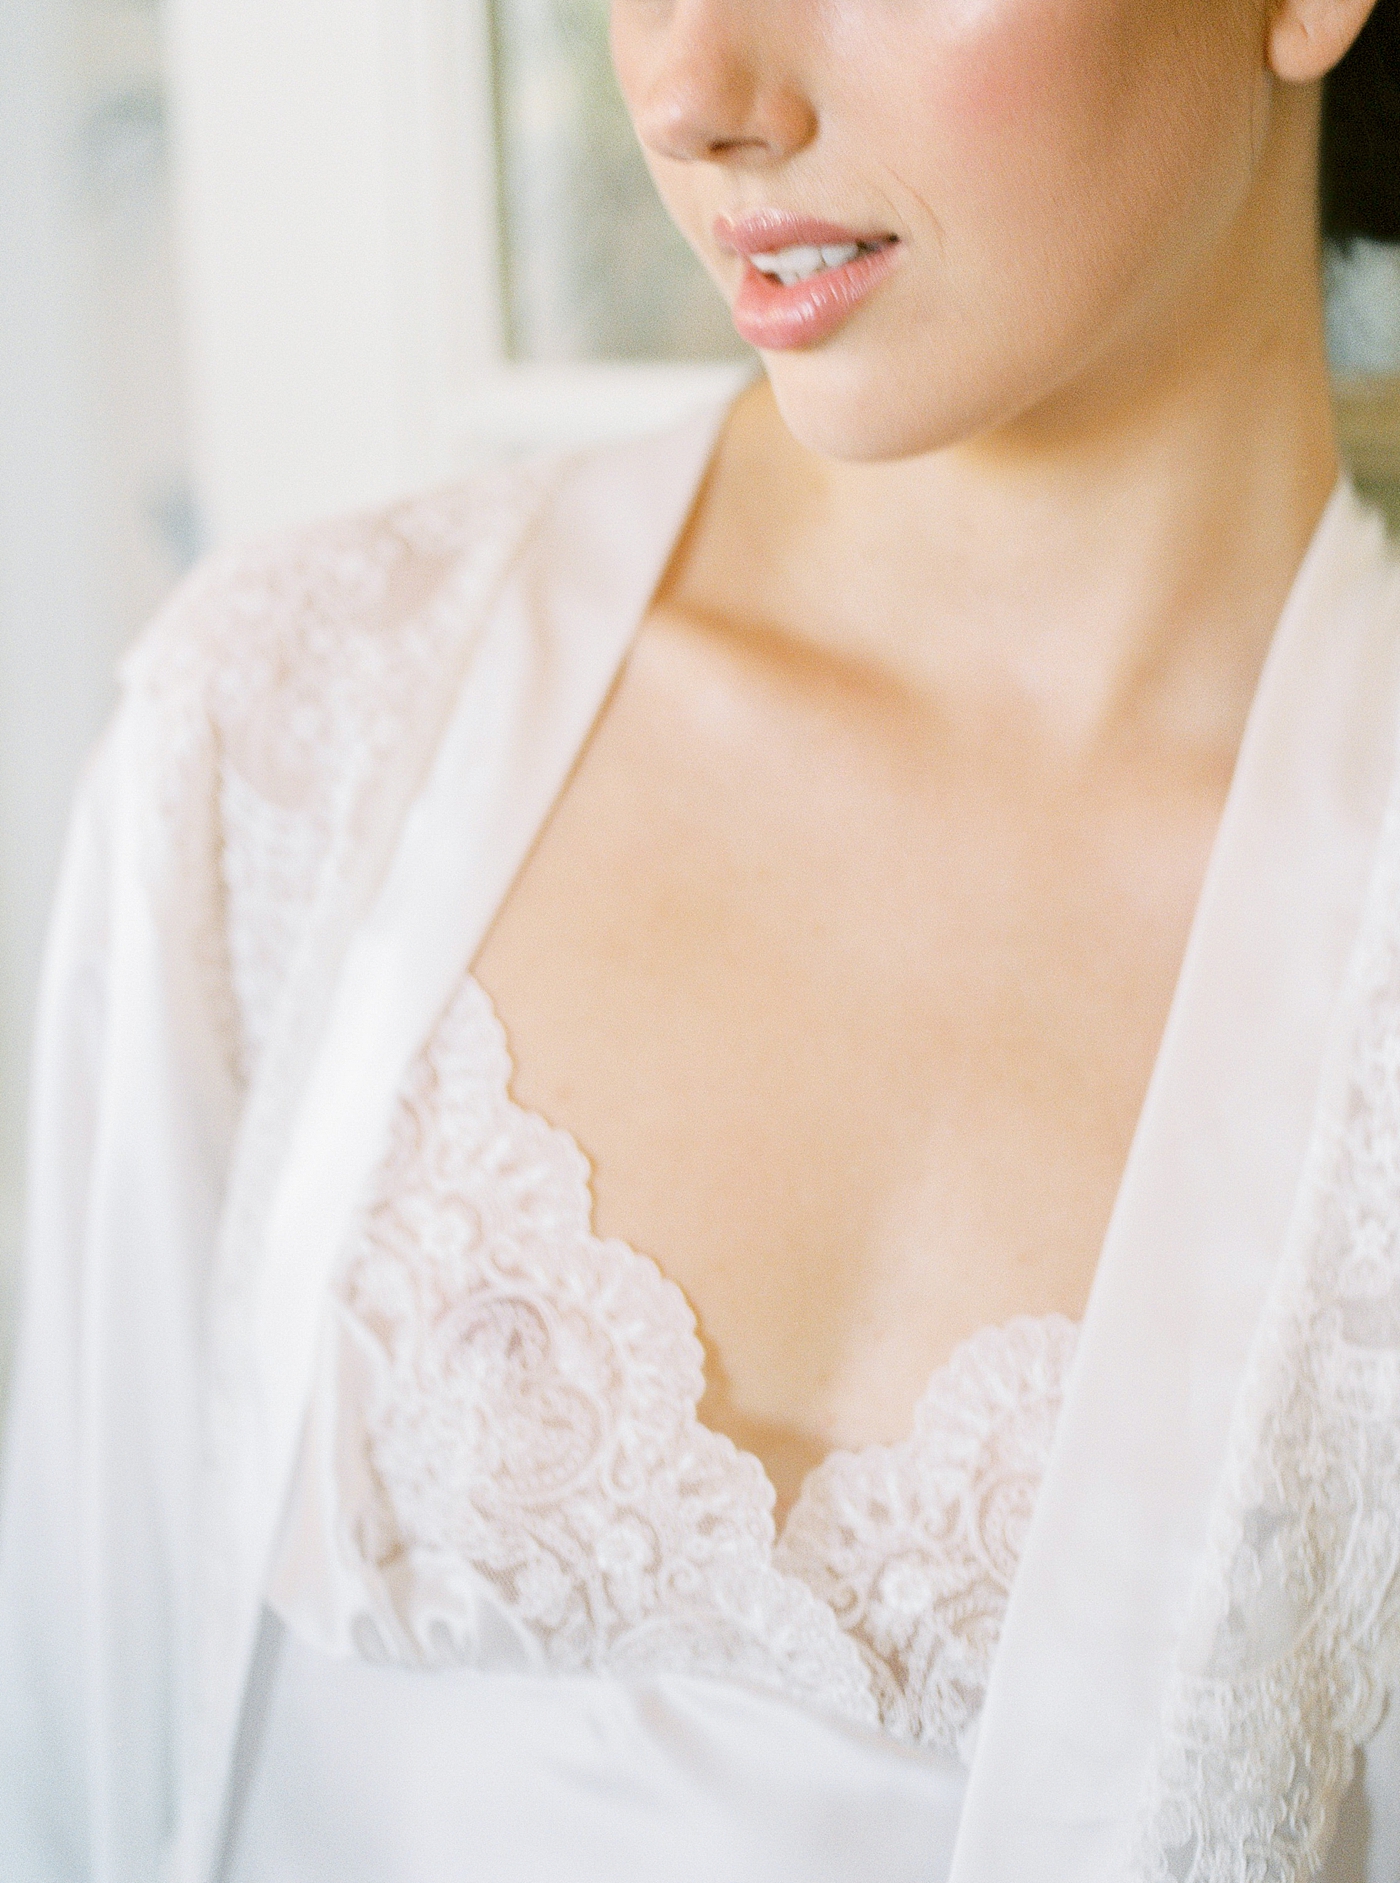 Detail of bride's white robe during bridal portraits | Image by Diane Sotero 